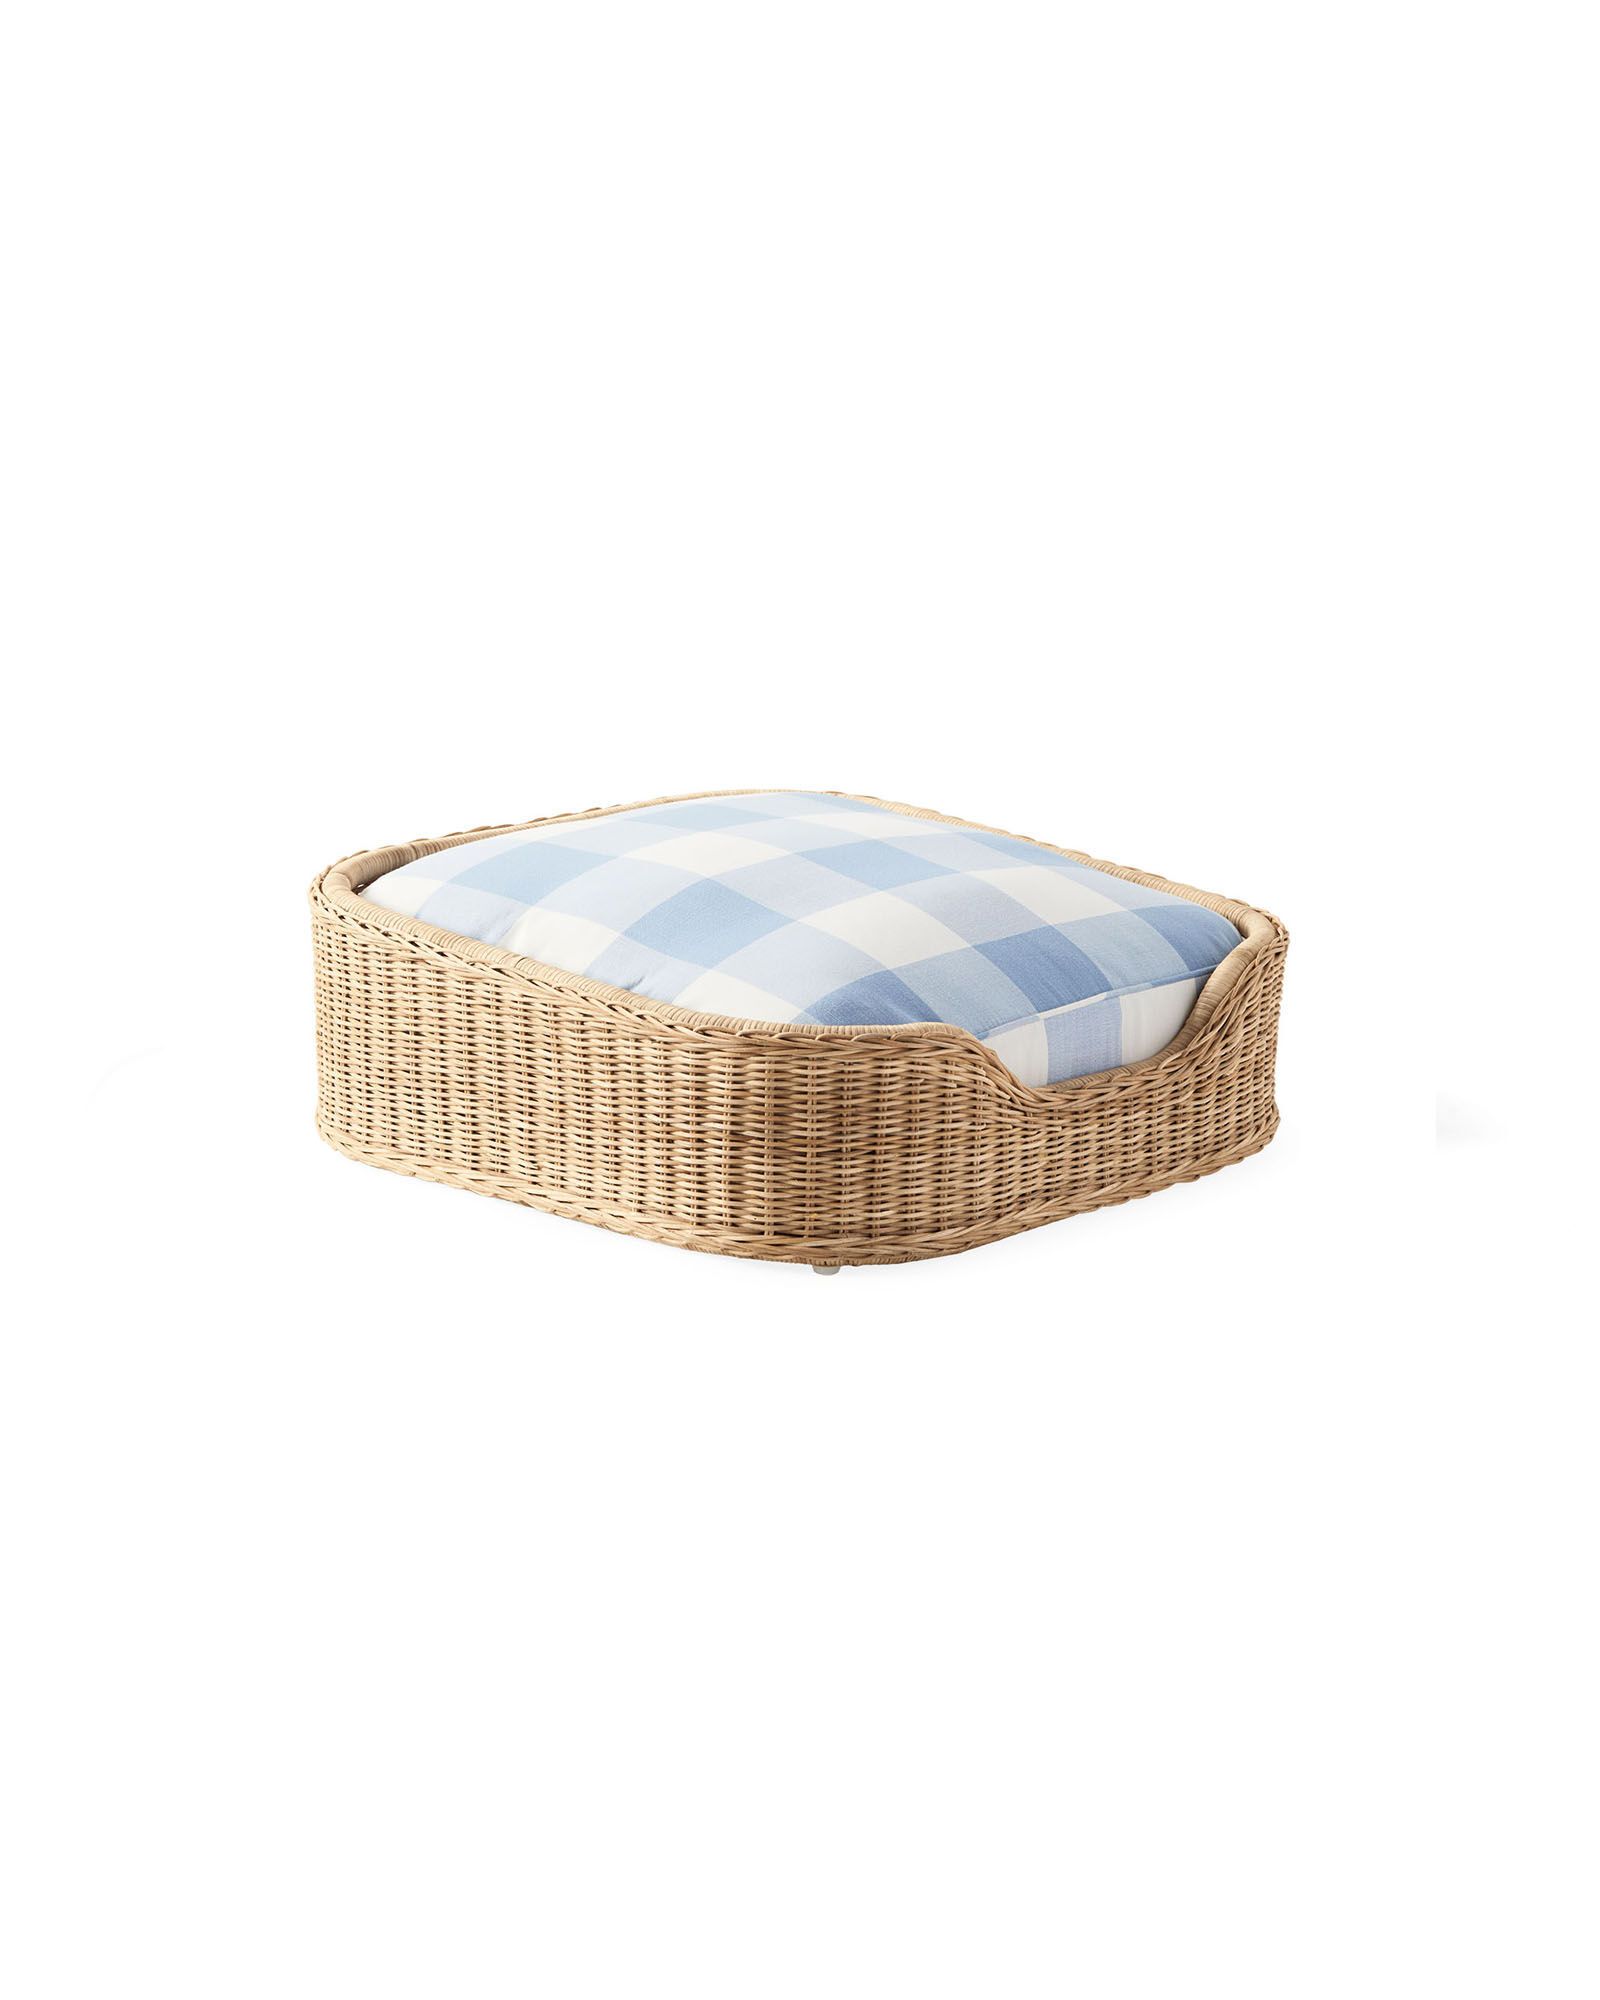 Wicker Dog Bed | Serena and Lily